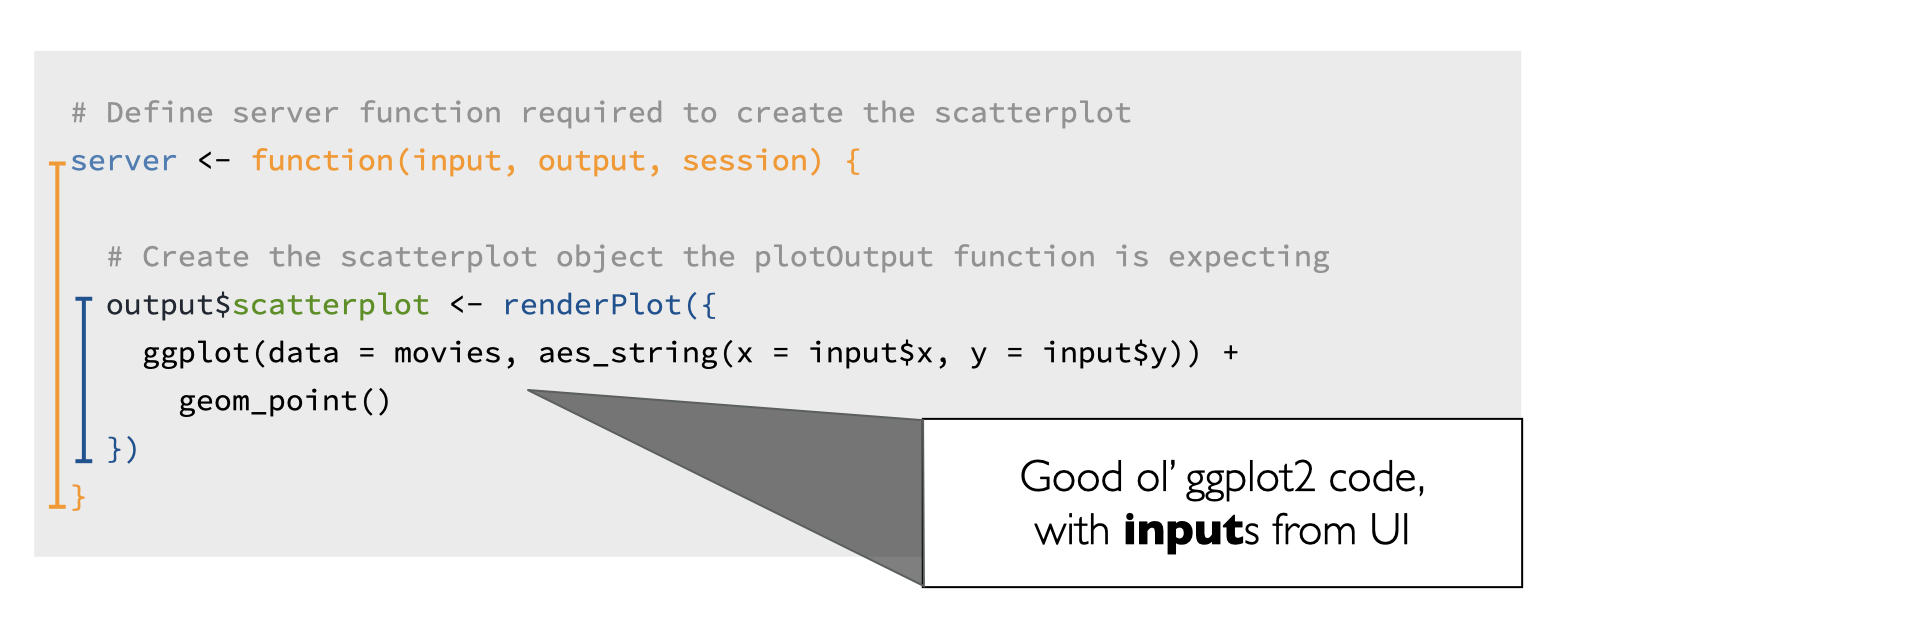 Arrow pointing to line of code in the Shiny app that says 'ggplot(data = movies, aes_string(x = input$x, y = input$y)) + geom_point()' and says Good ol' ggplot2 code with inputs from UI.